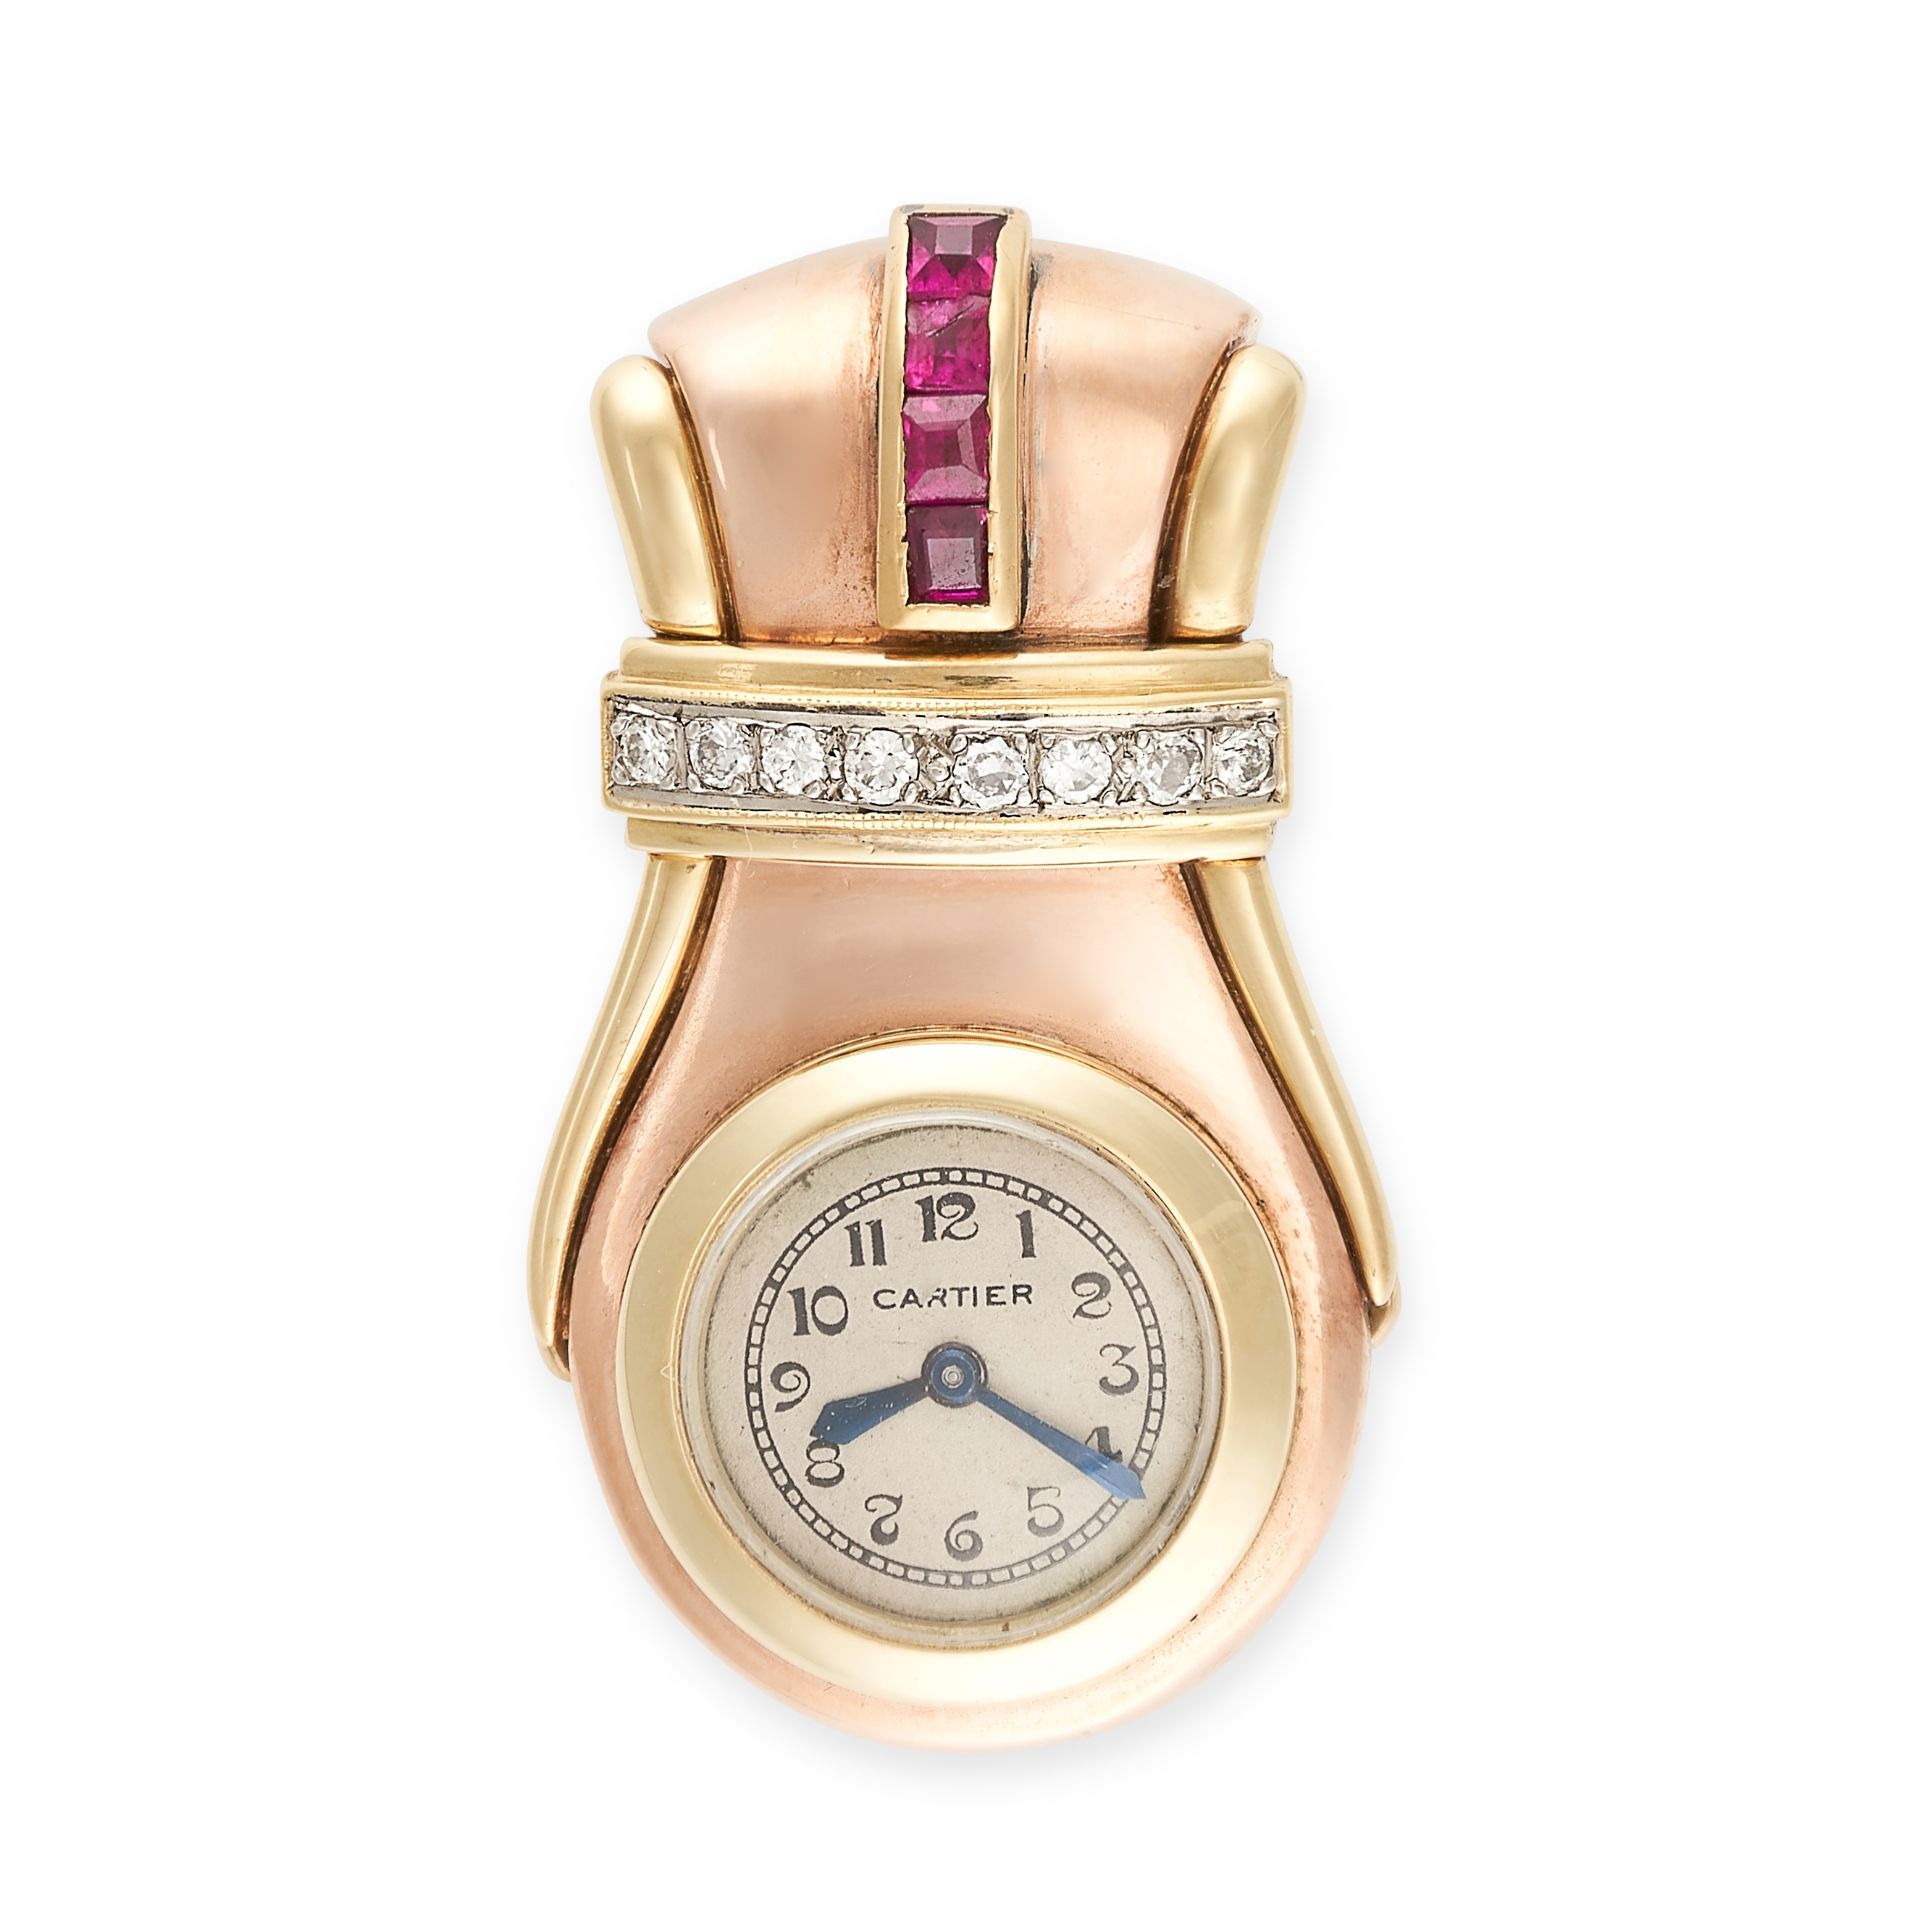 NO RESERVE - CARTIER, A RETRO DIAMOND AND SYNTHETIC RUBY CLIP BROOCH WATCH, CIRCA 1940  Made in